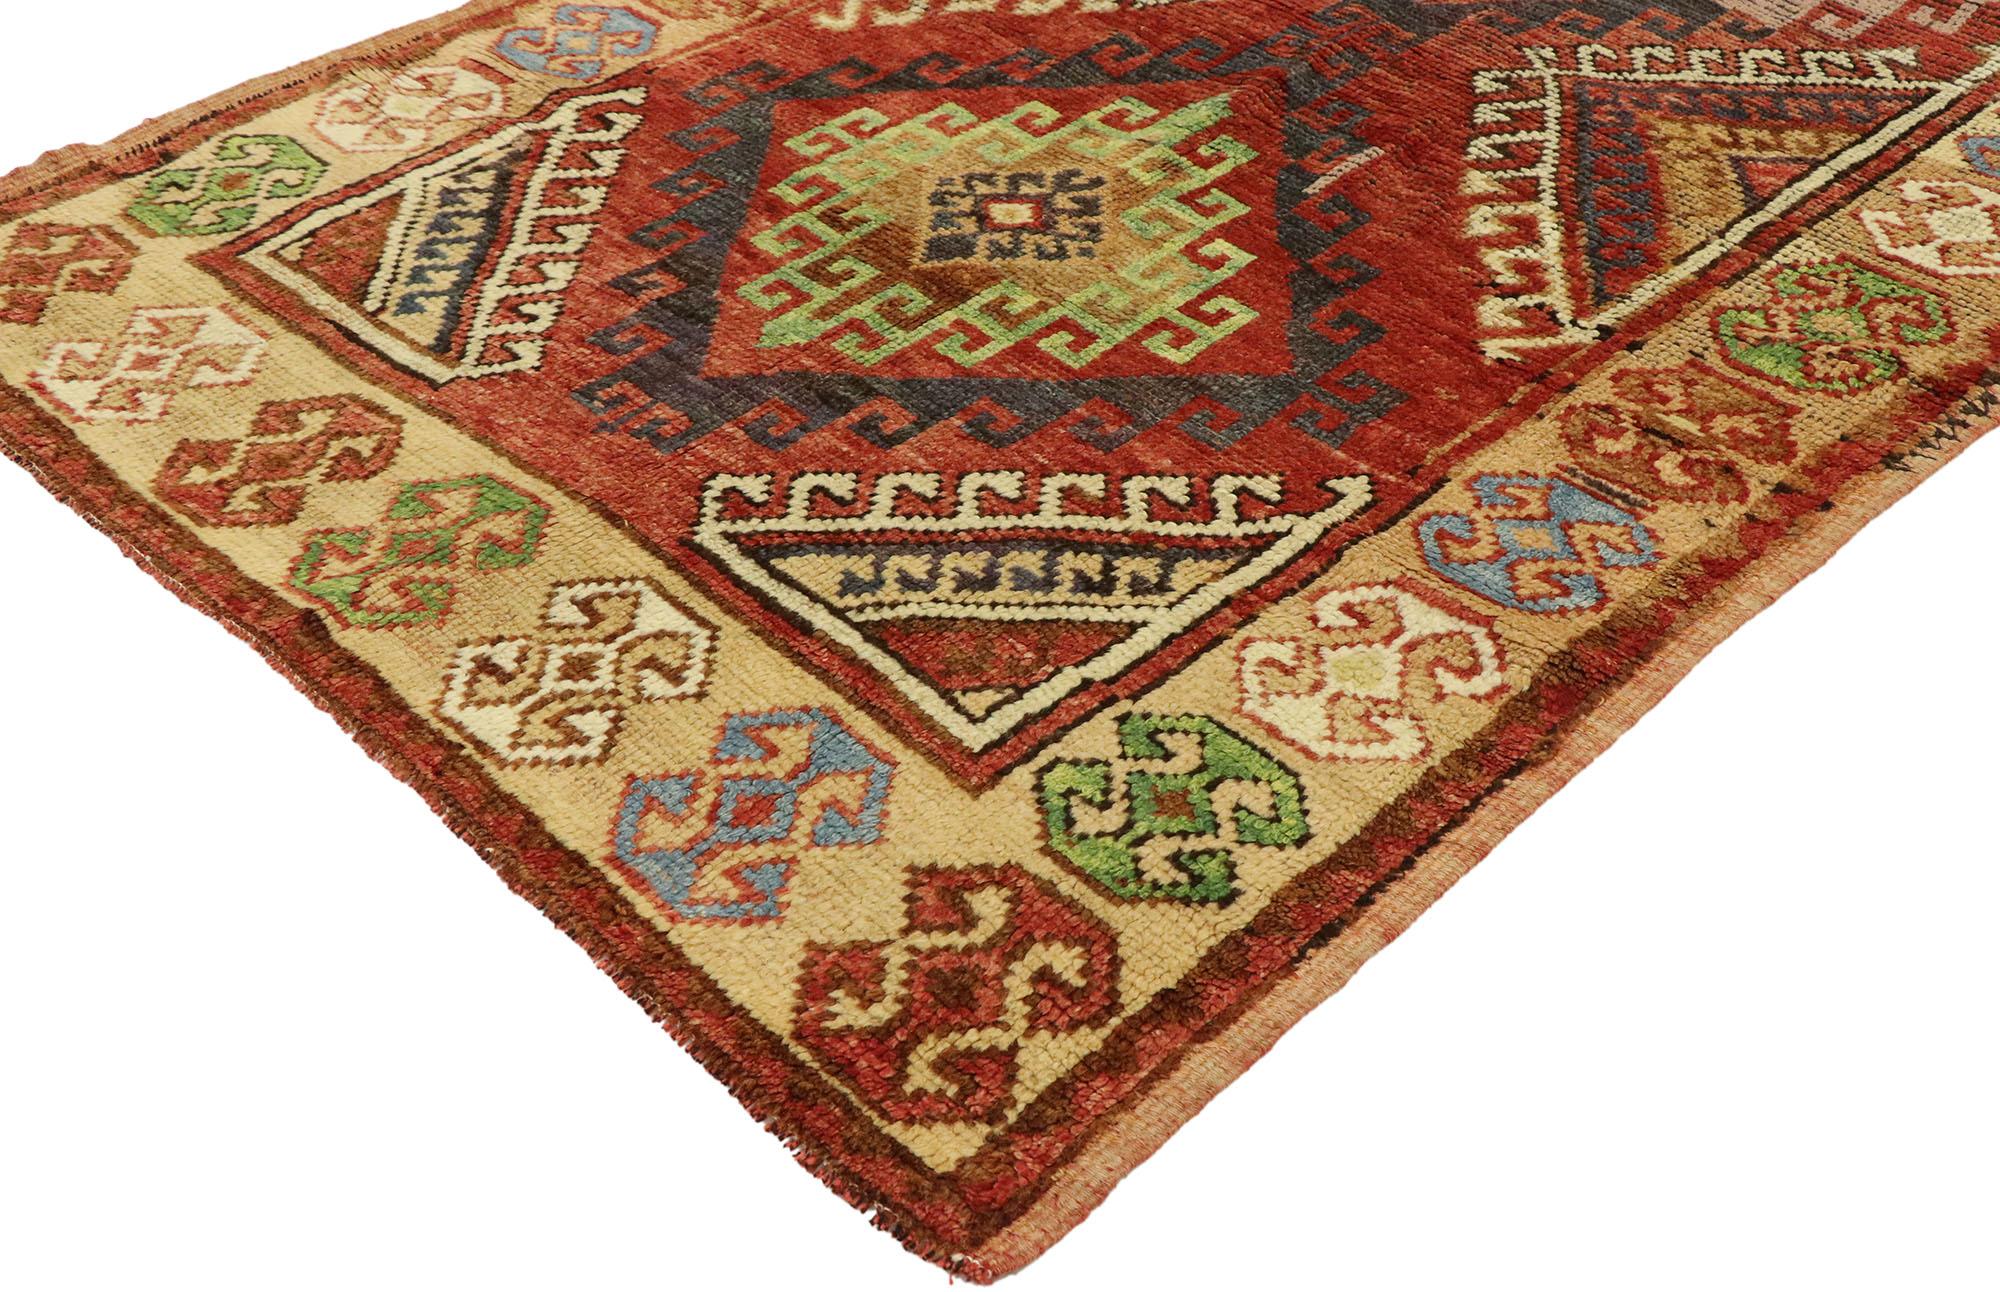 53056, vintage Turkish Oushak rug with Mid-Century Modern Tribal style. Blending tribal charm, ancient symbolism and Folk Art warmth, this hand knotted wool vintage Turkish Oushak rug beautifully showcases a bold elemental design. The abrashed field